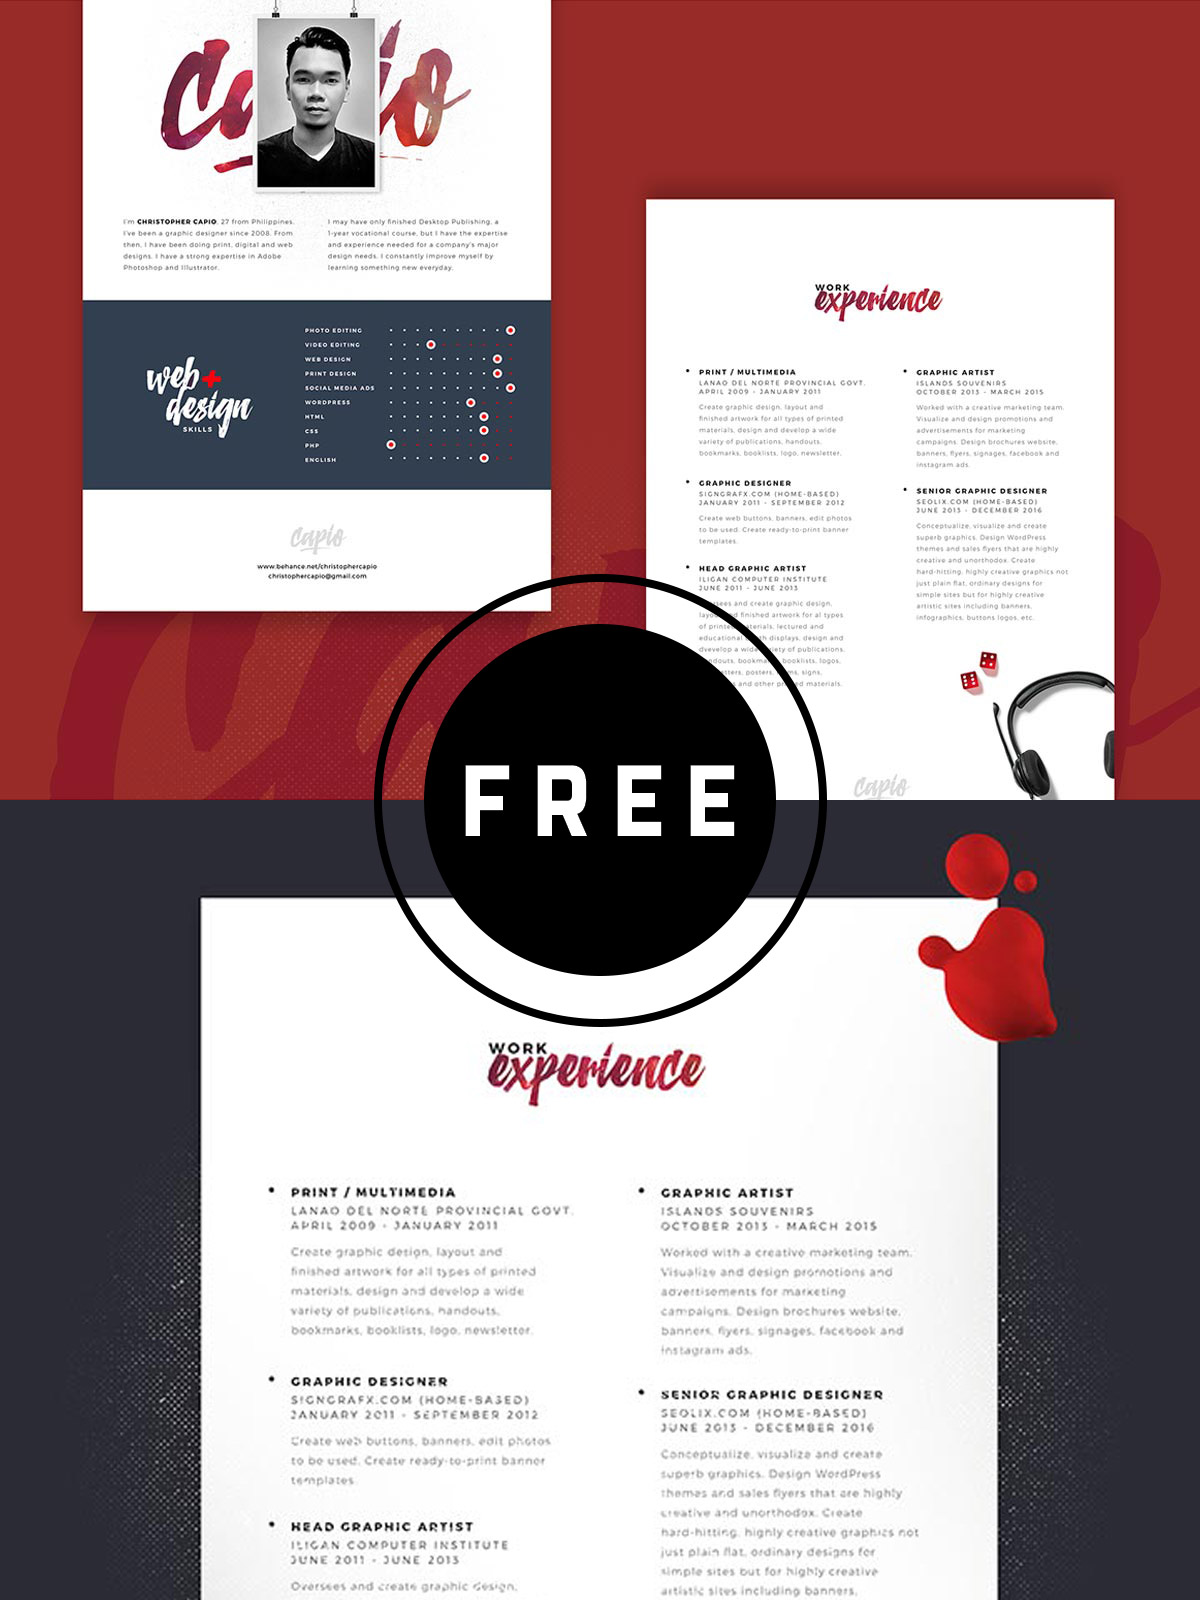 98 awesome free resume templates for 2019